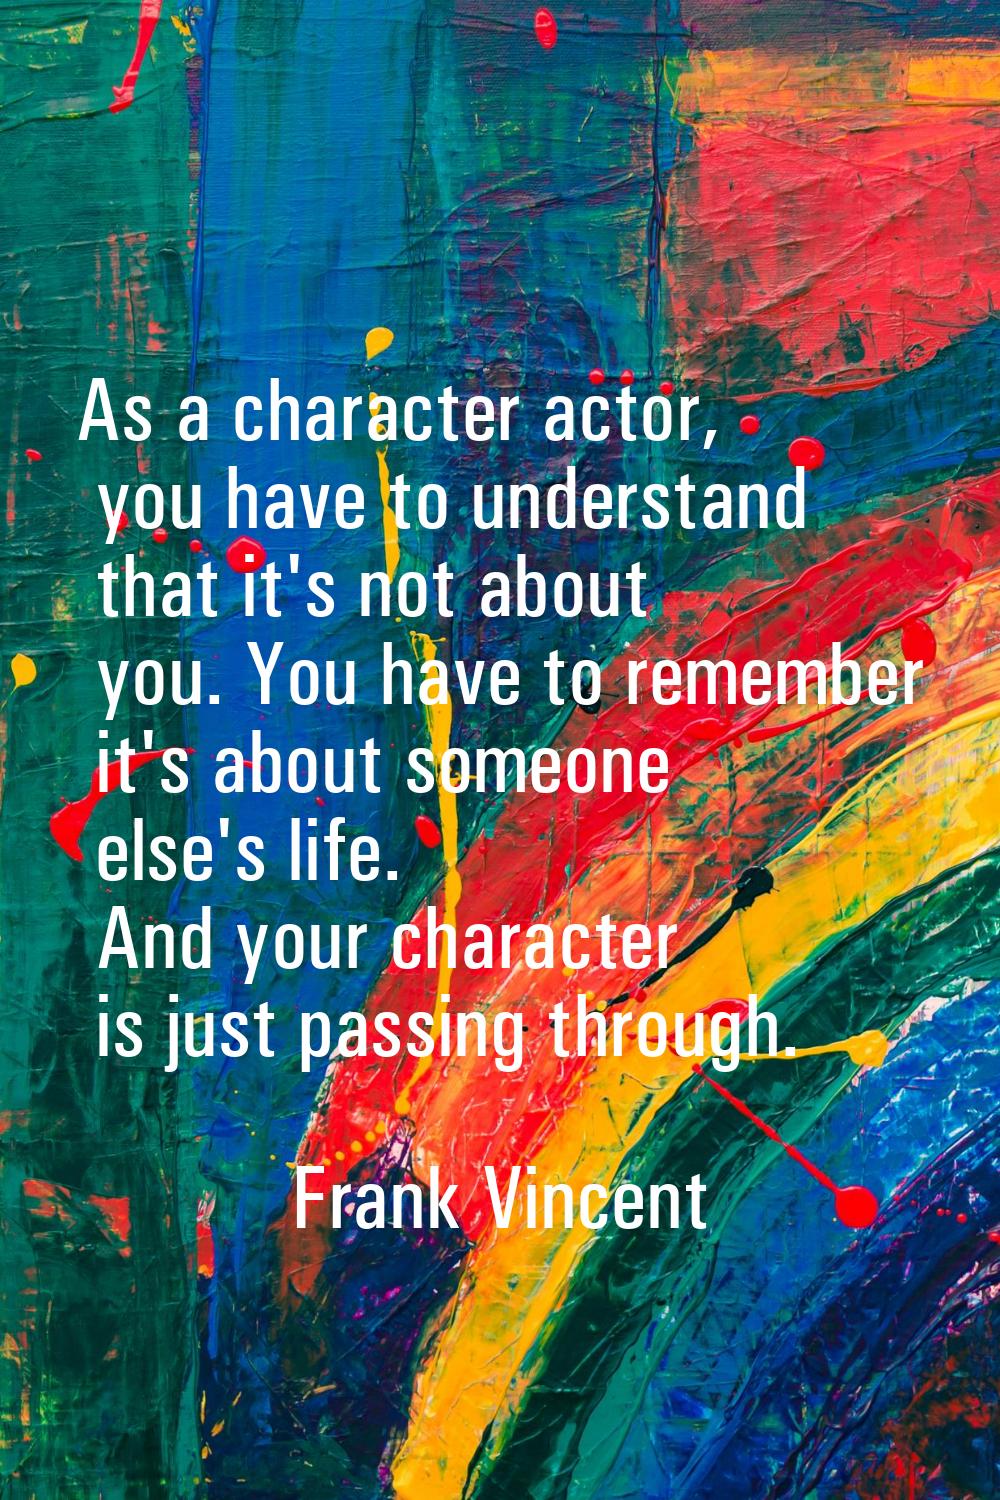 As a character actor, you have to understand that it's not about you. You have to remember it's abo